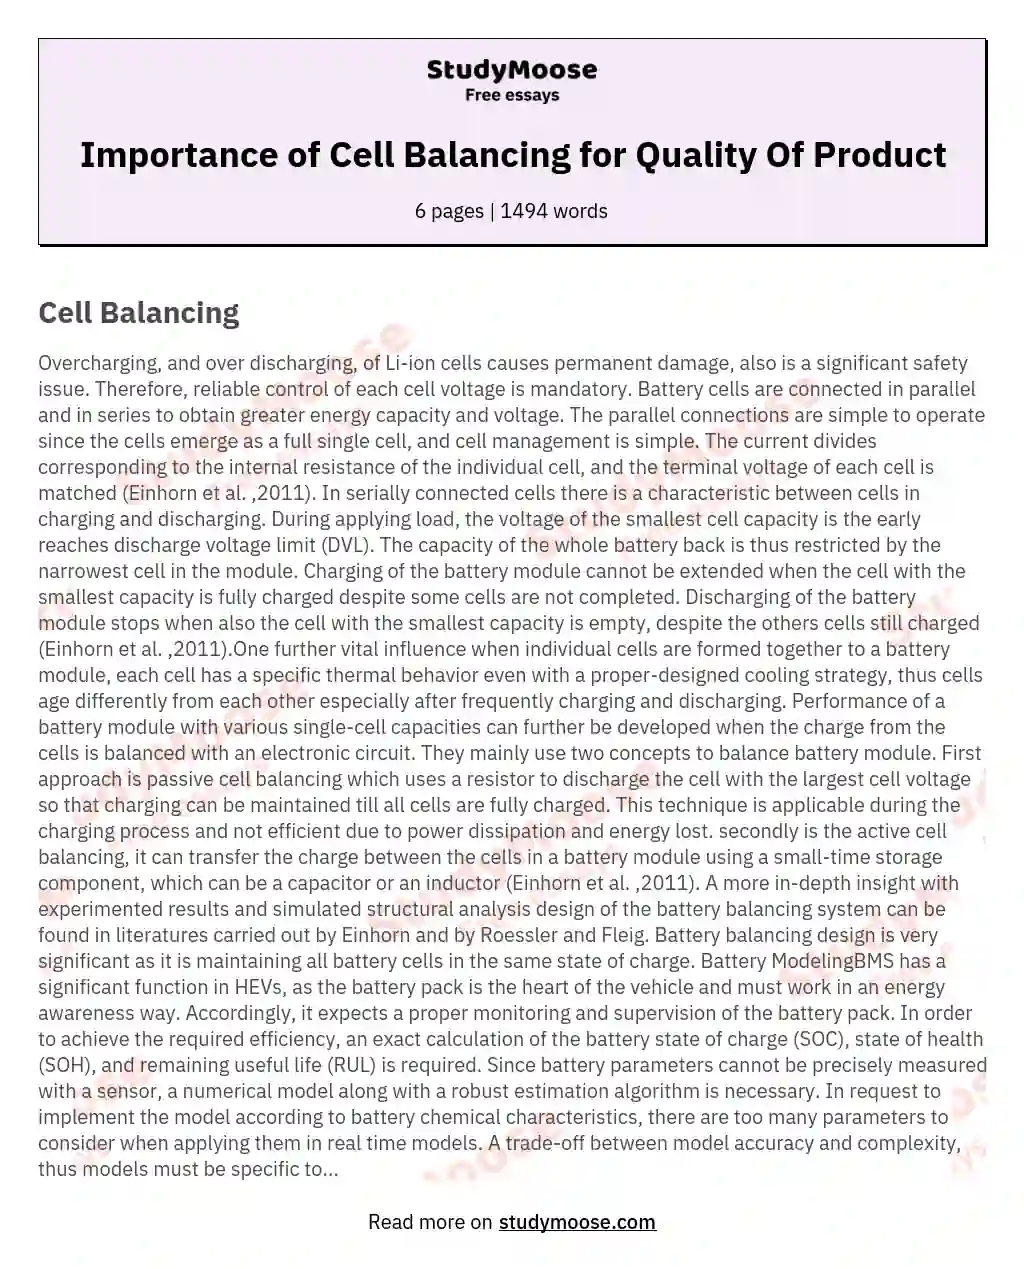 Importance of Cell Balancing for Quality Of Product essay